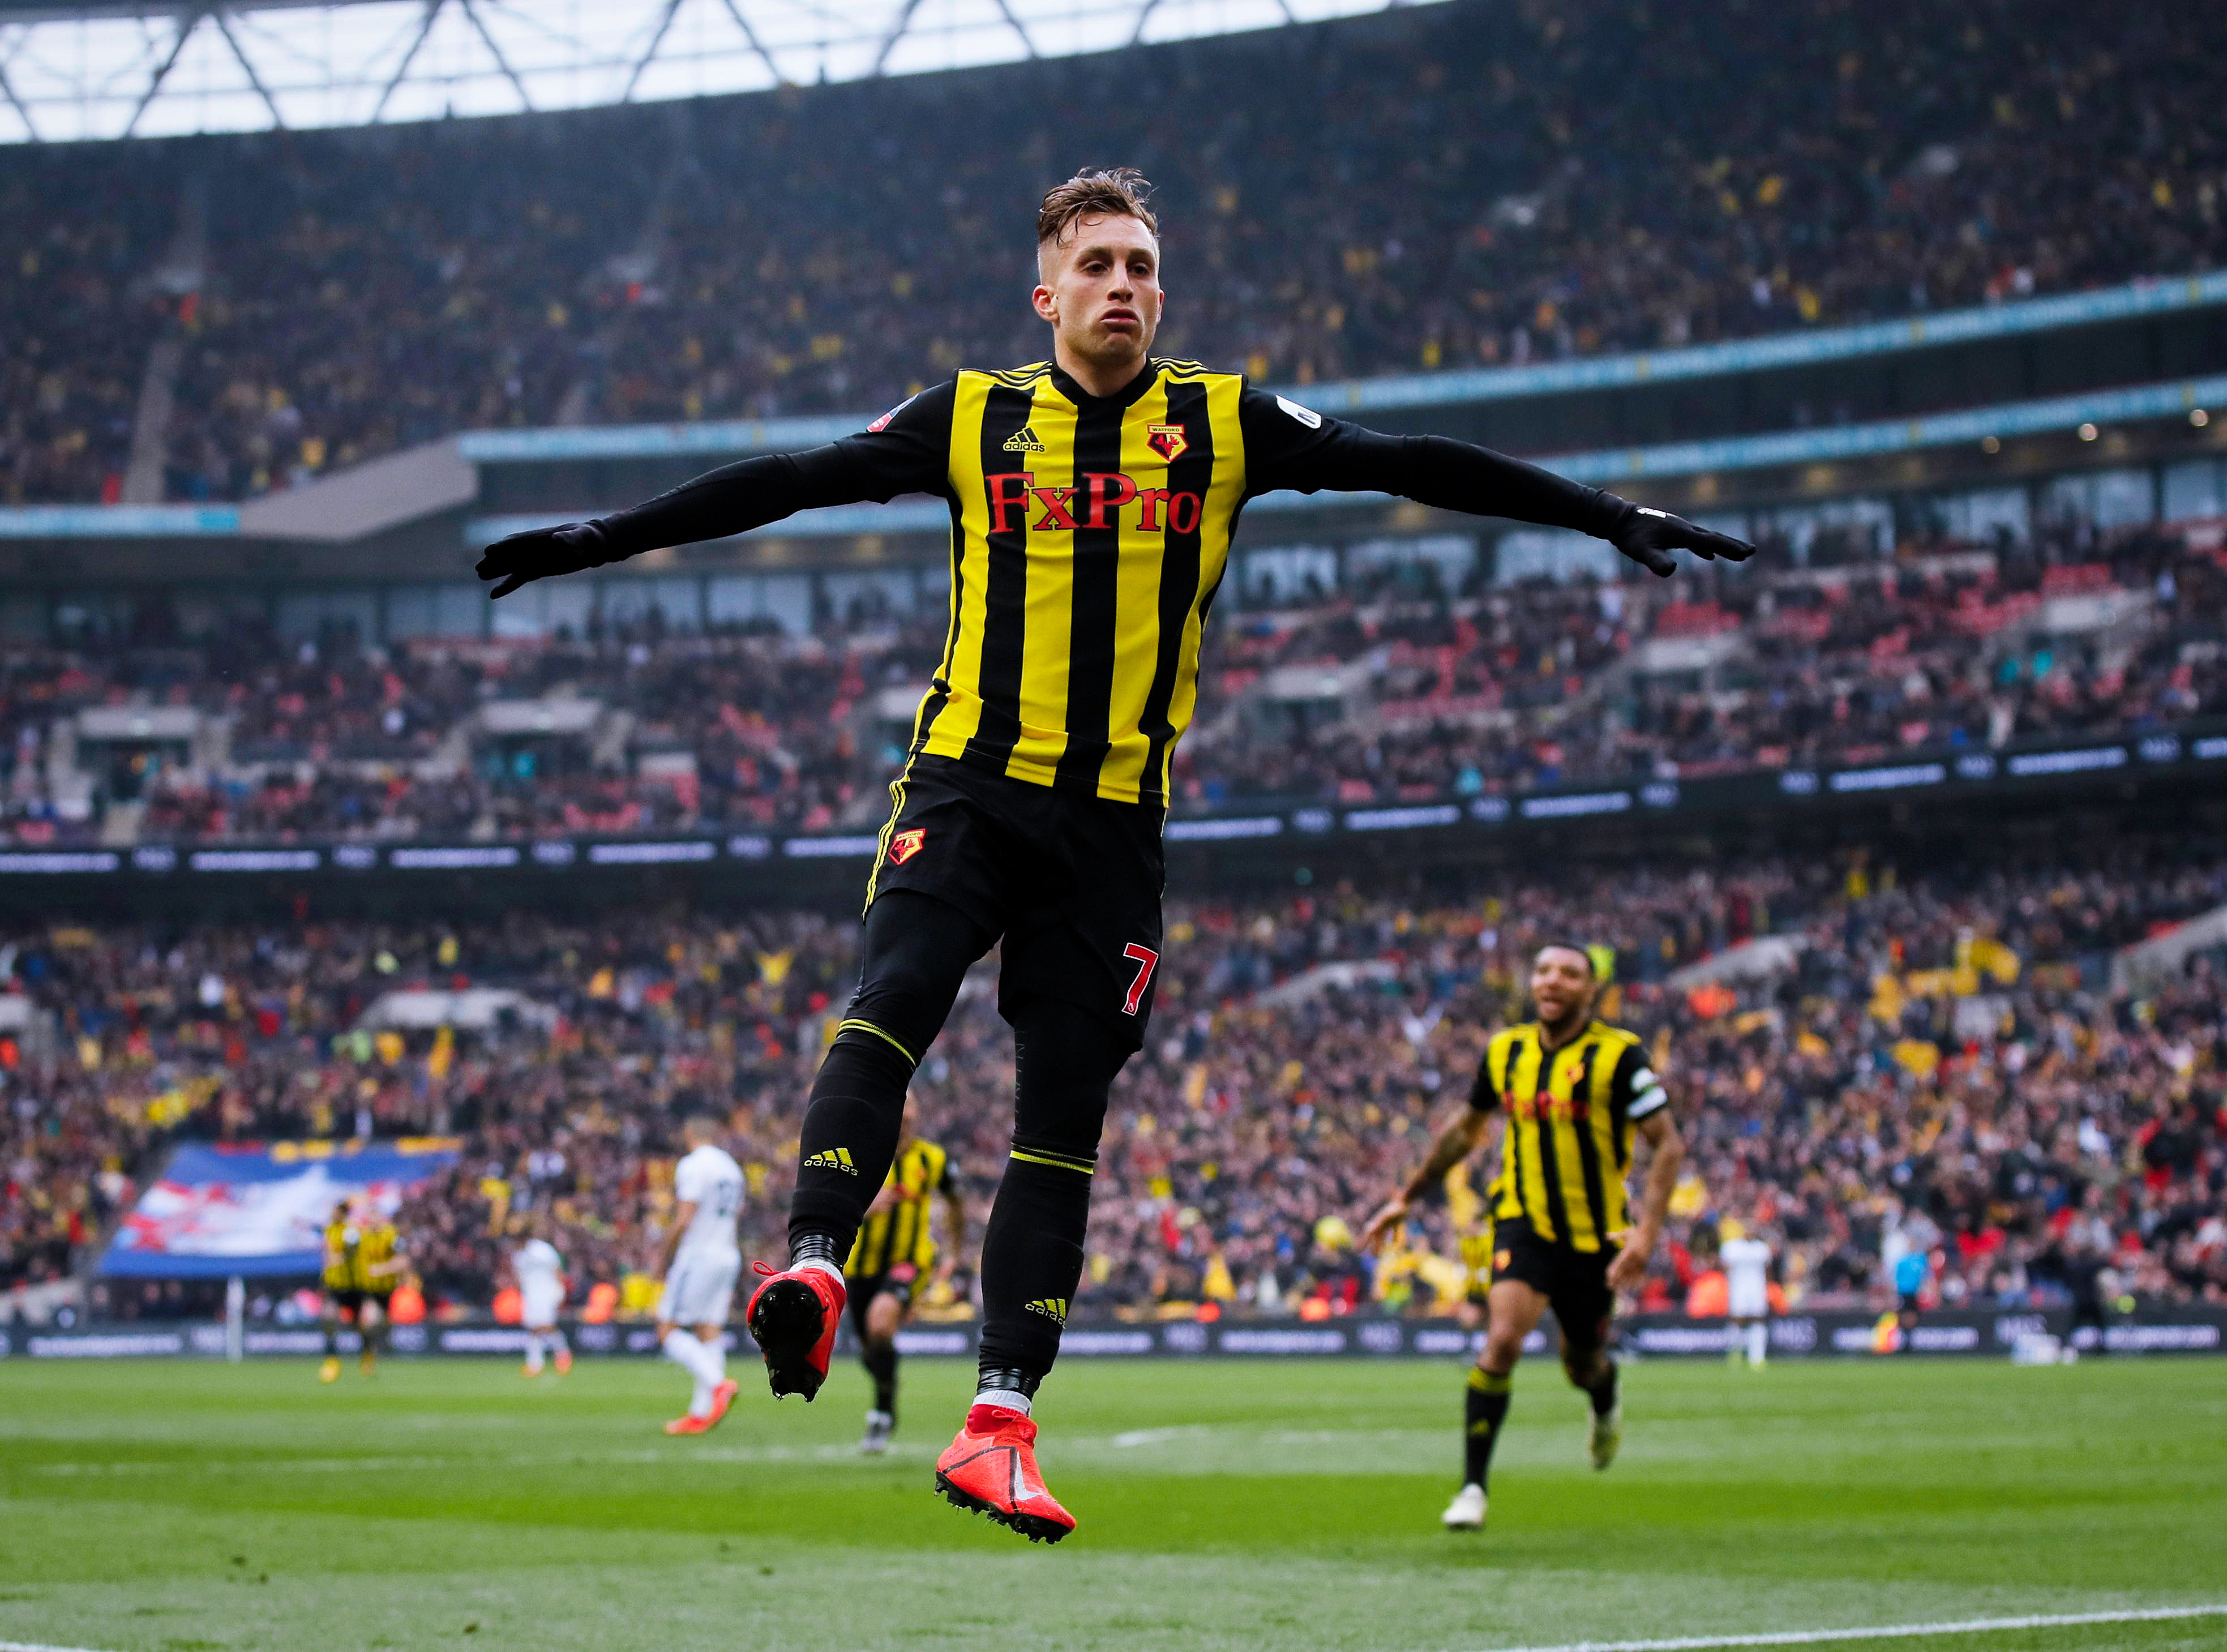 Why Watford, having endured 35 years of striking ups and downs, are